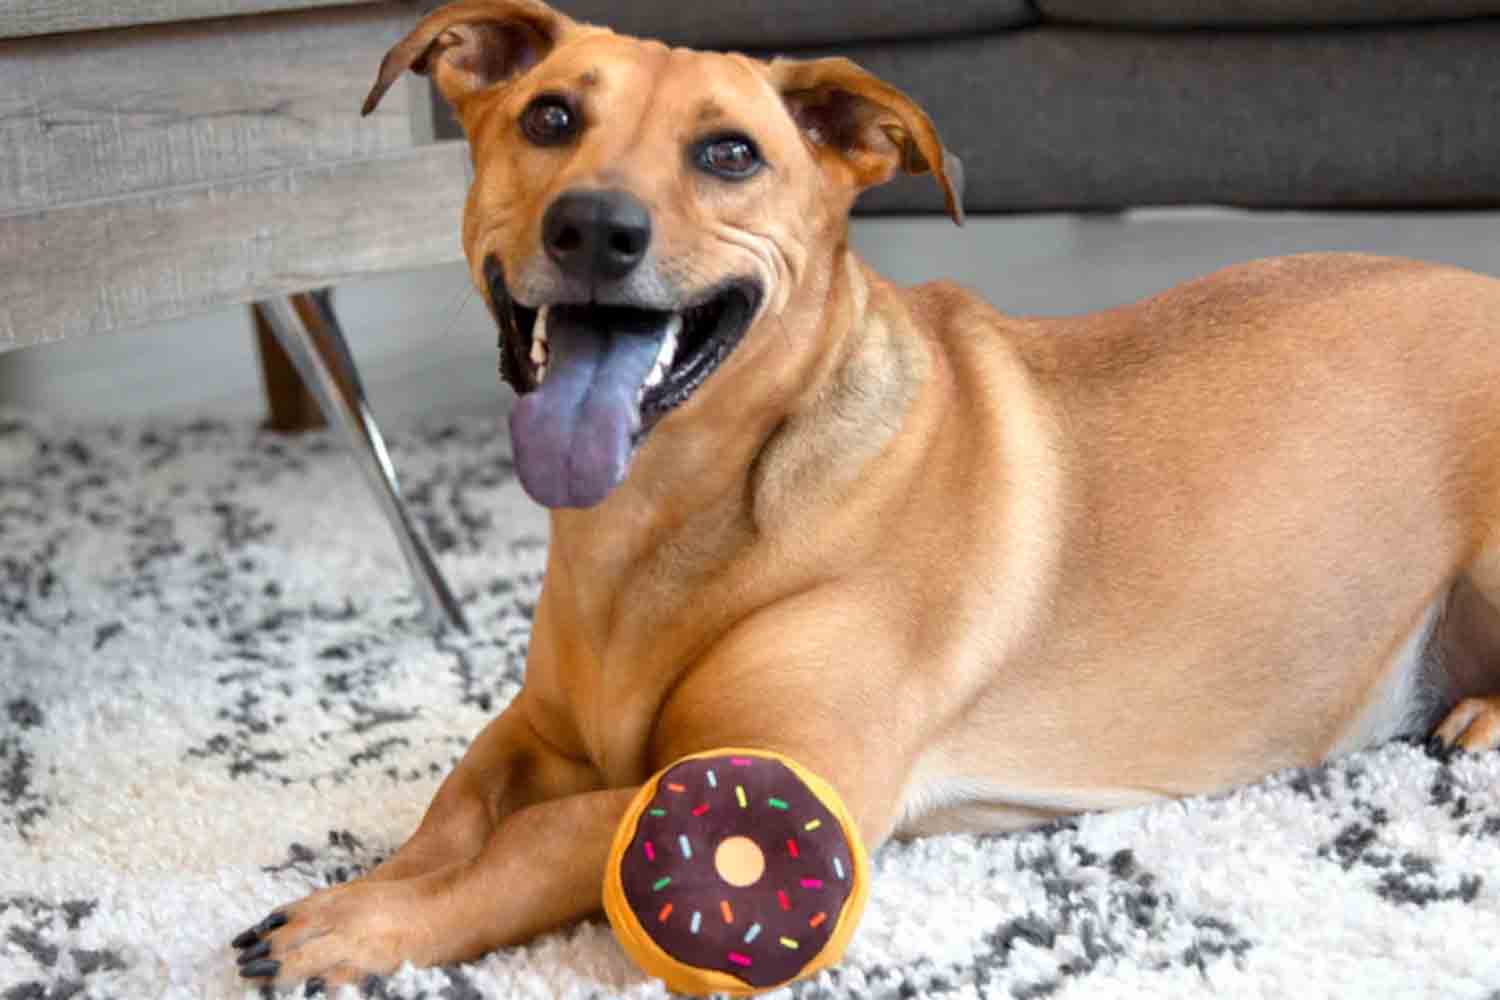 a dog on a carpet with a donut toy